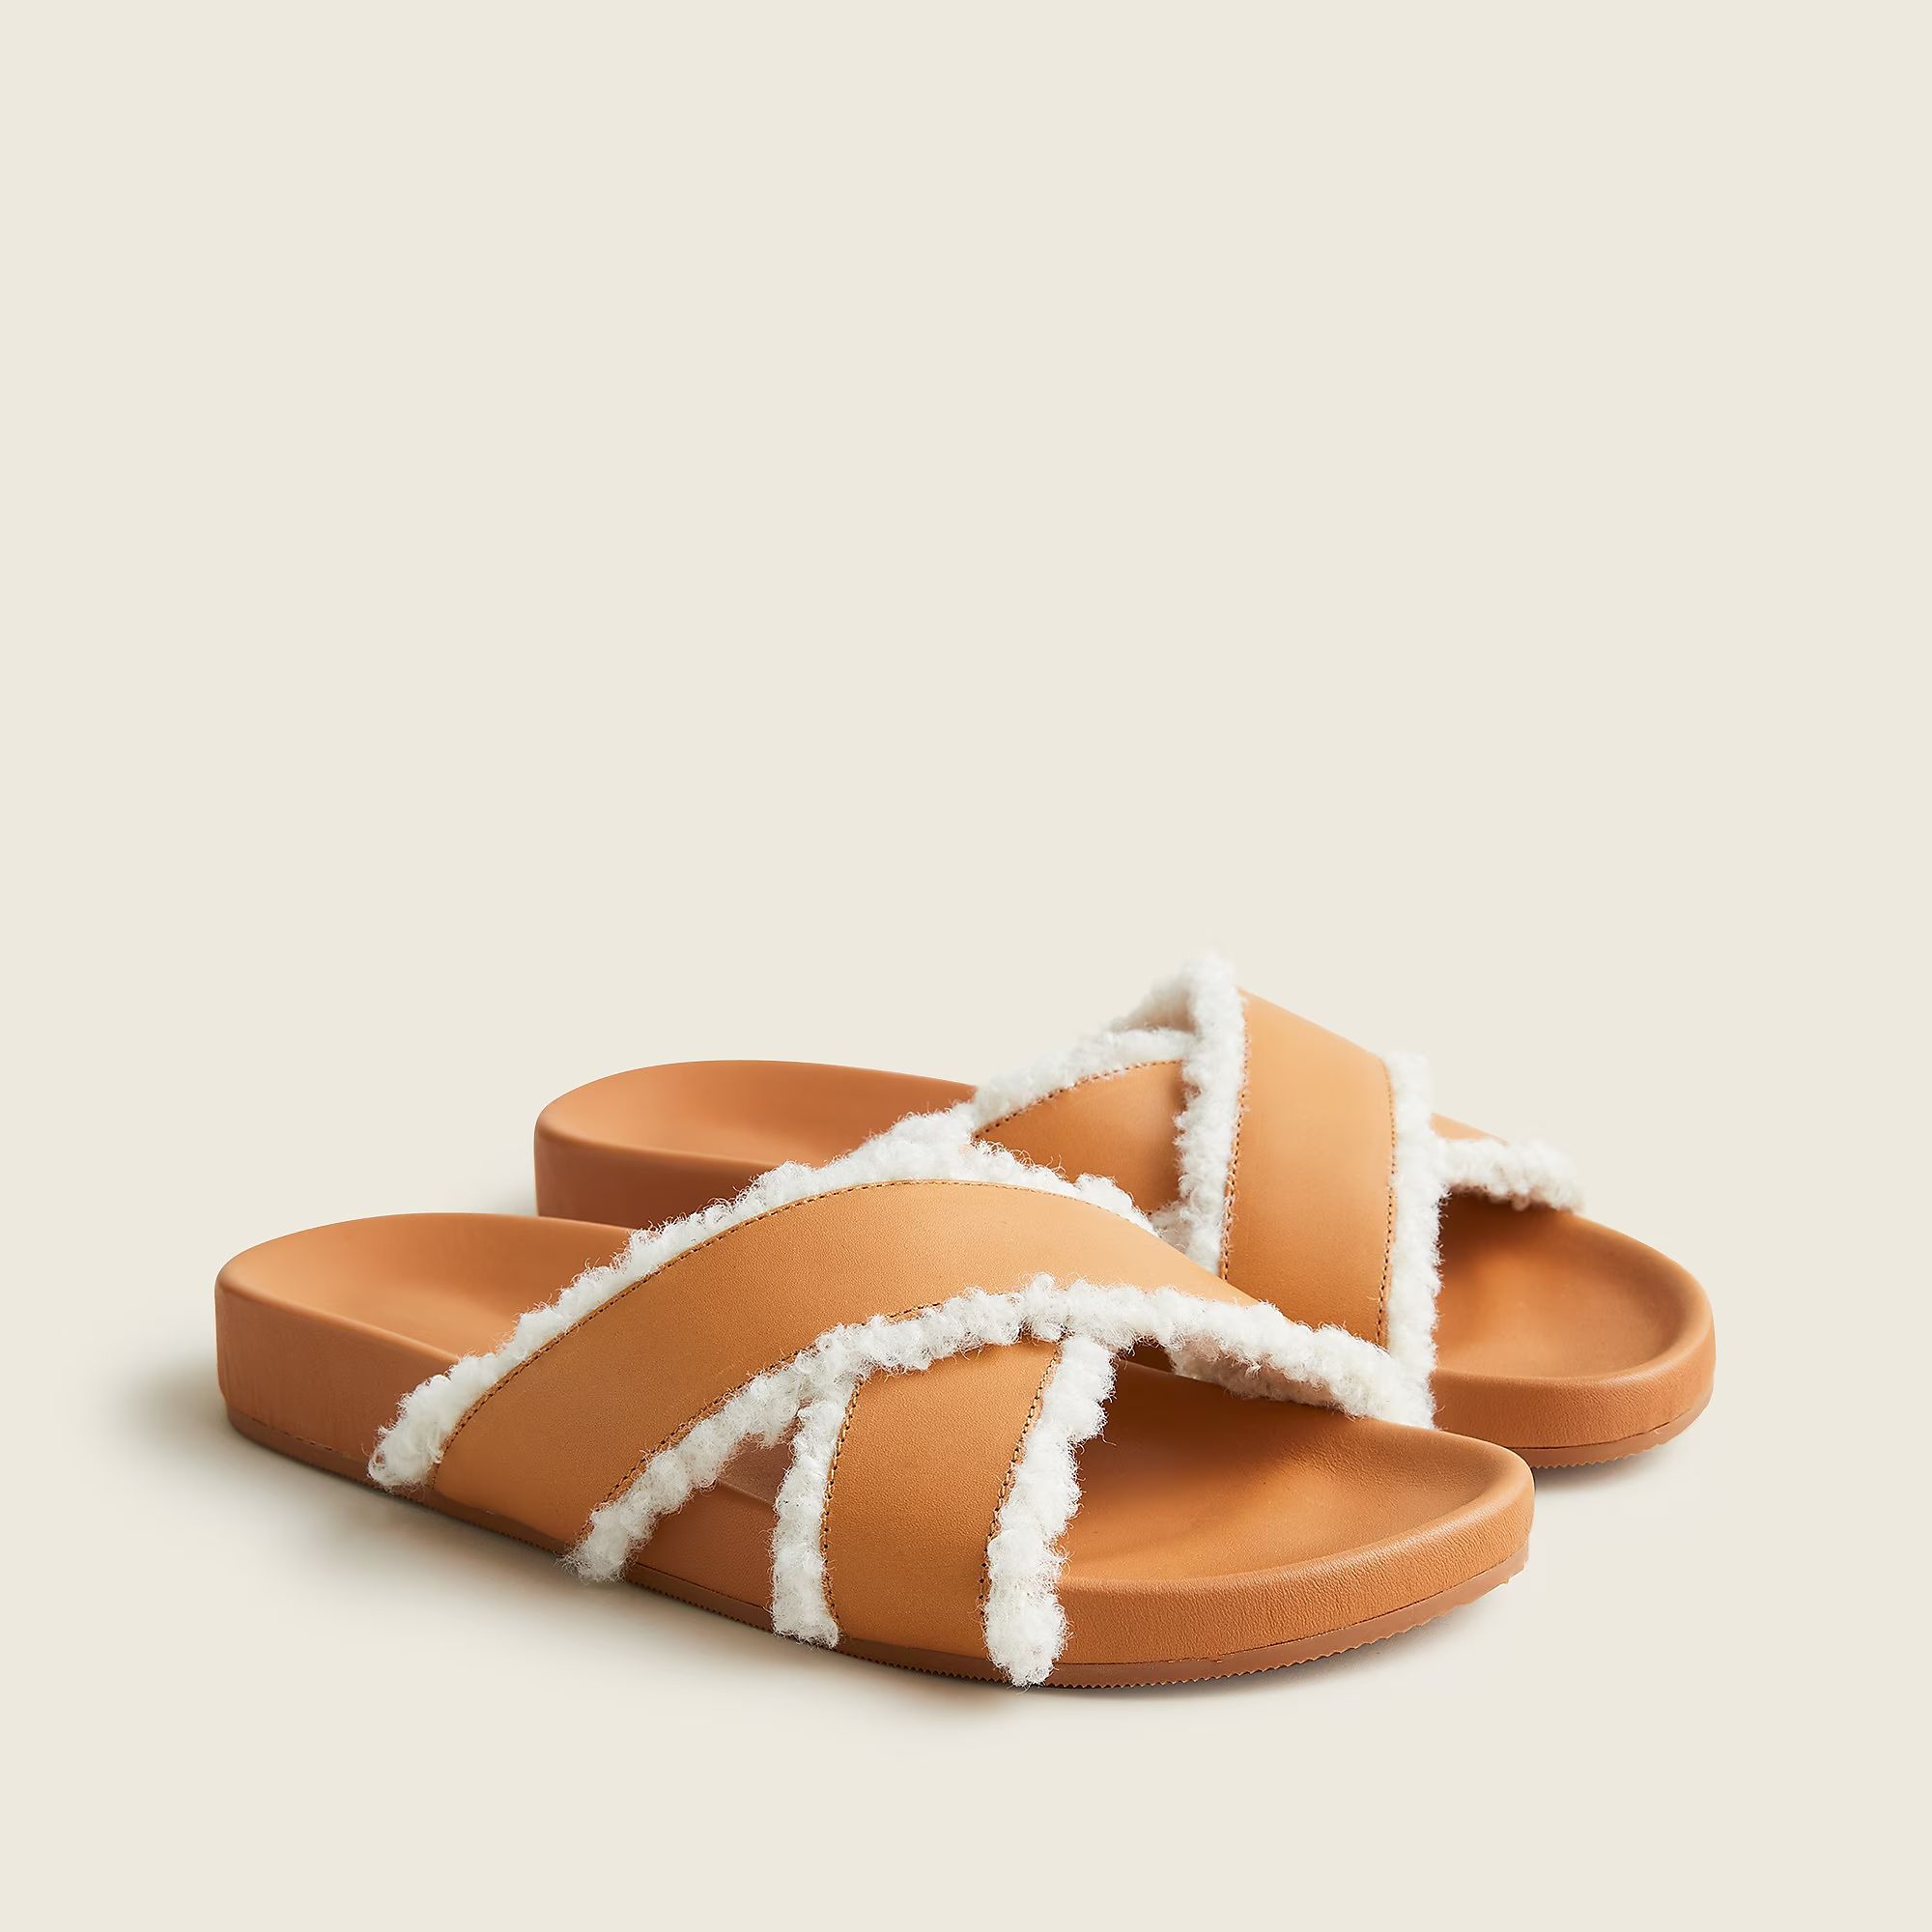 Pacific shearling cross-strap sandals | J.Crew US